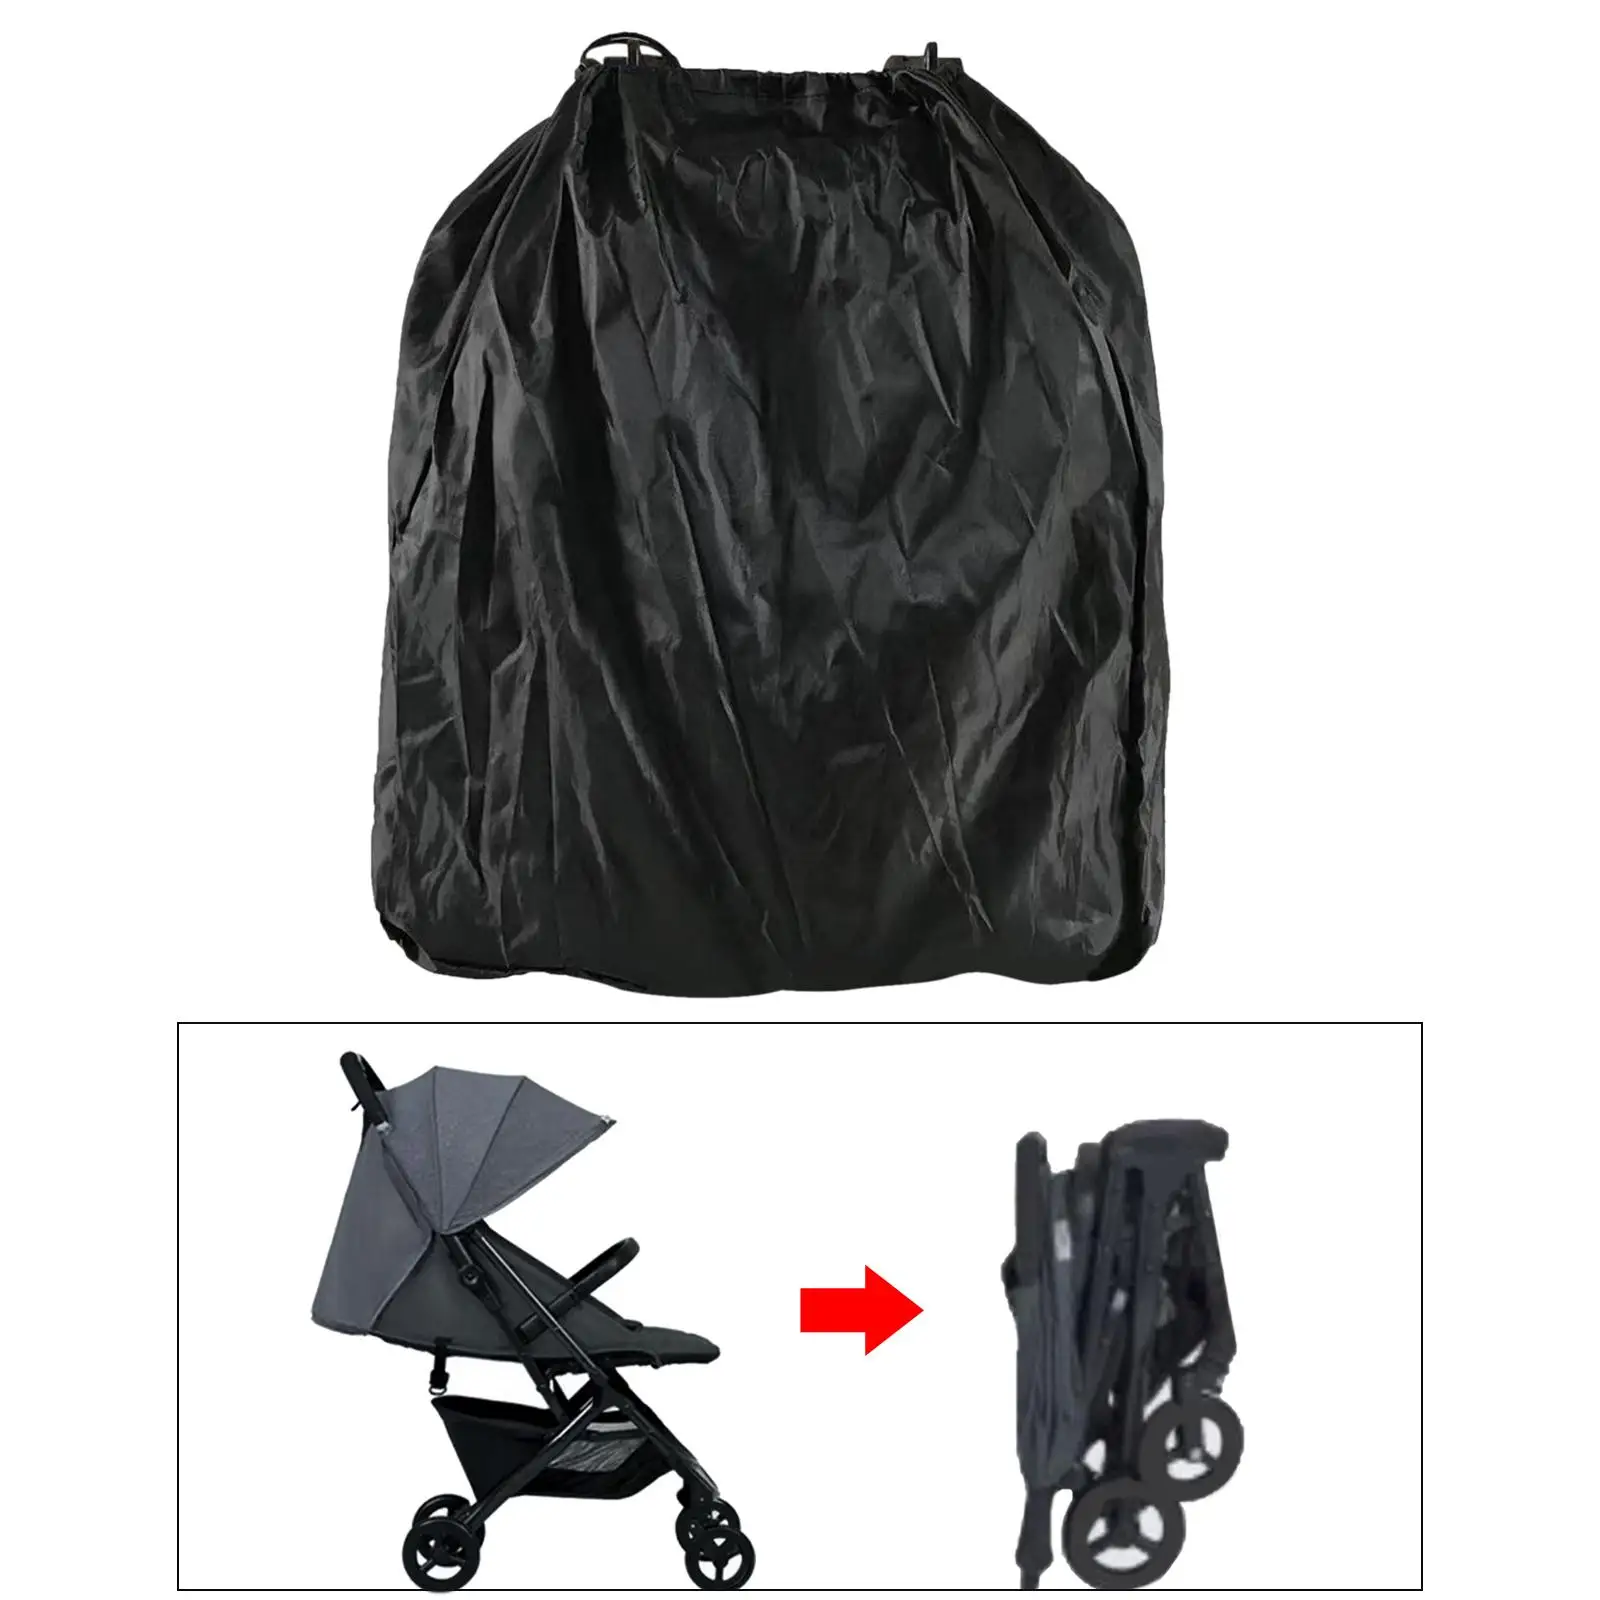 Air Travel Stroller Bag Drawstring Closure Oxford Cloth Easy Carrying Stroller Storage Bag for Airplane Airports Gate Check